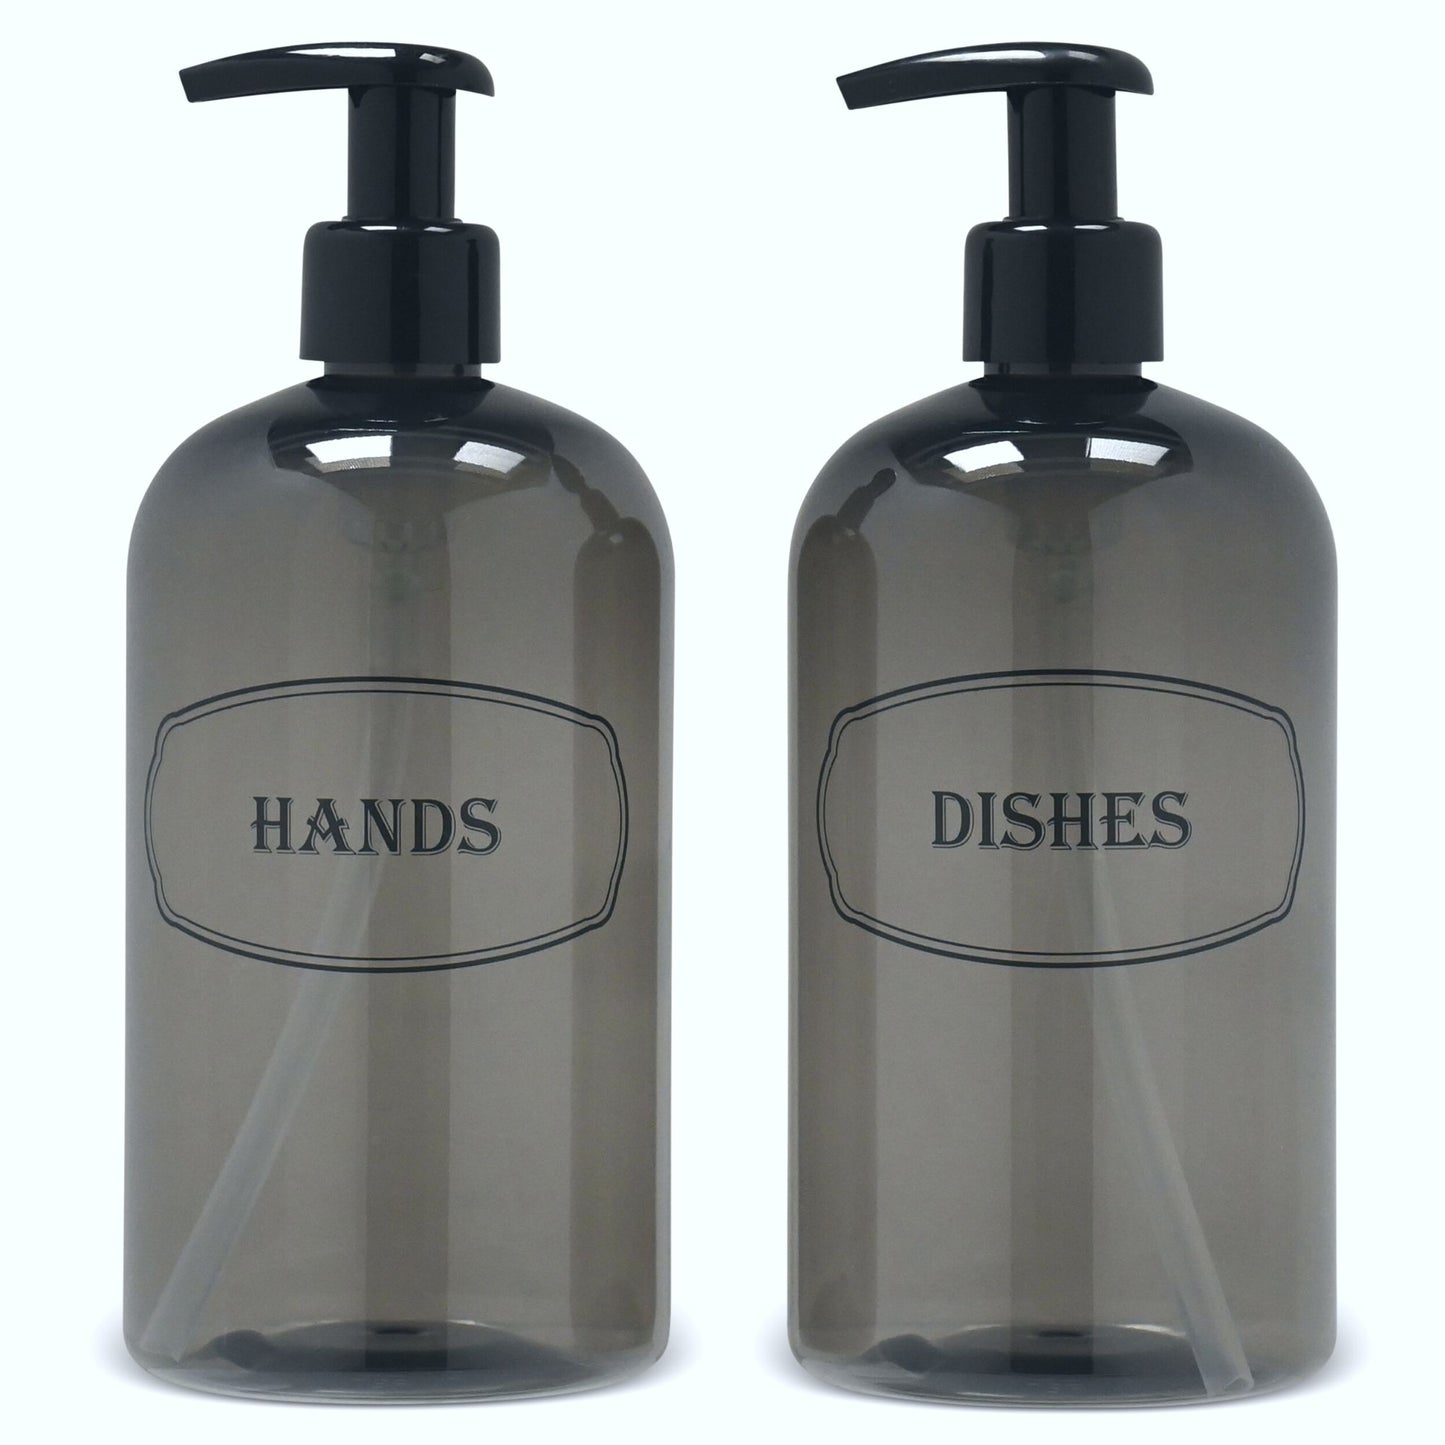 16 oz PET Plastic Set of Hand and Dish Soap Refillable Bottle Dispensers with Black Lotion Pumps-BPA-free and Preprinted